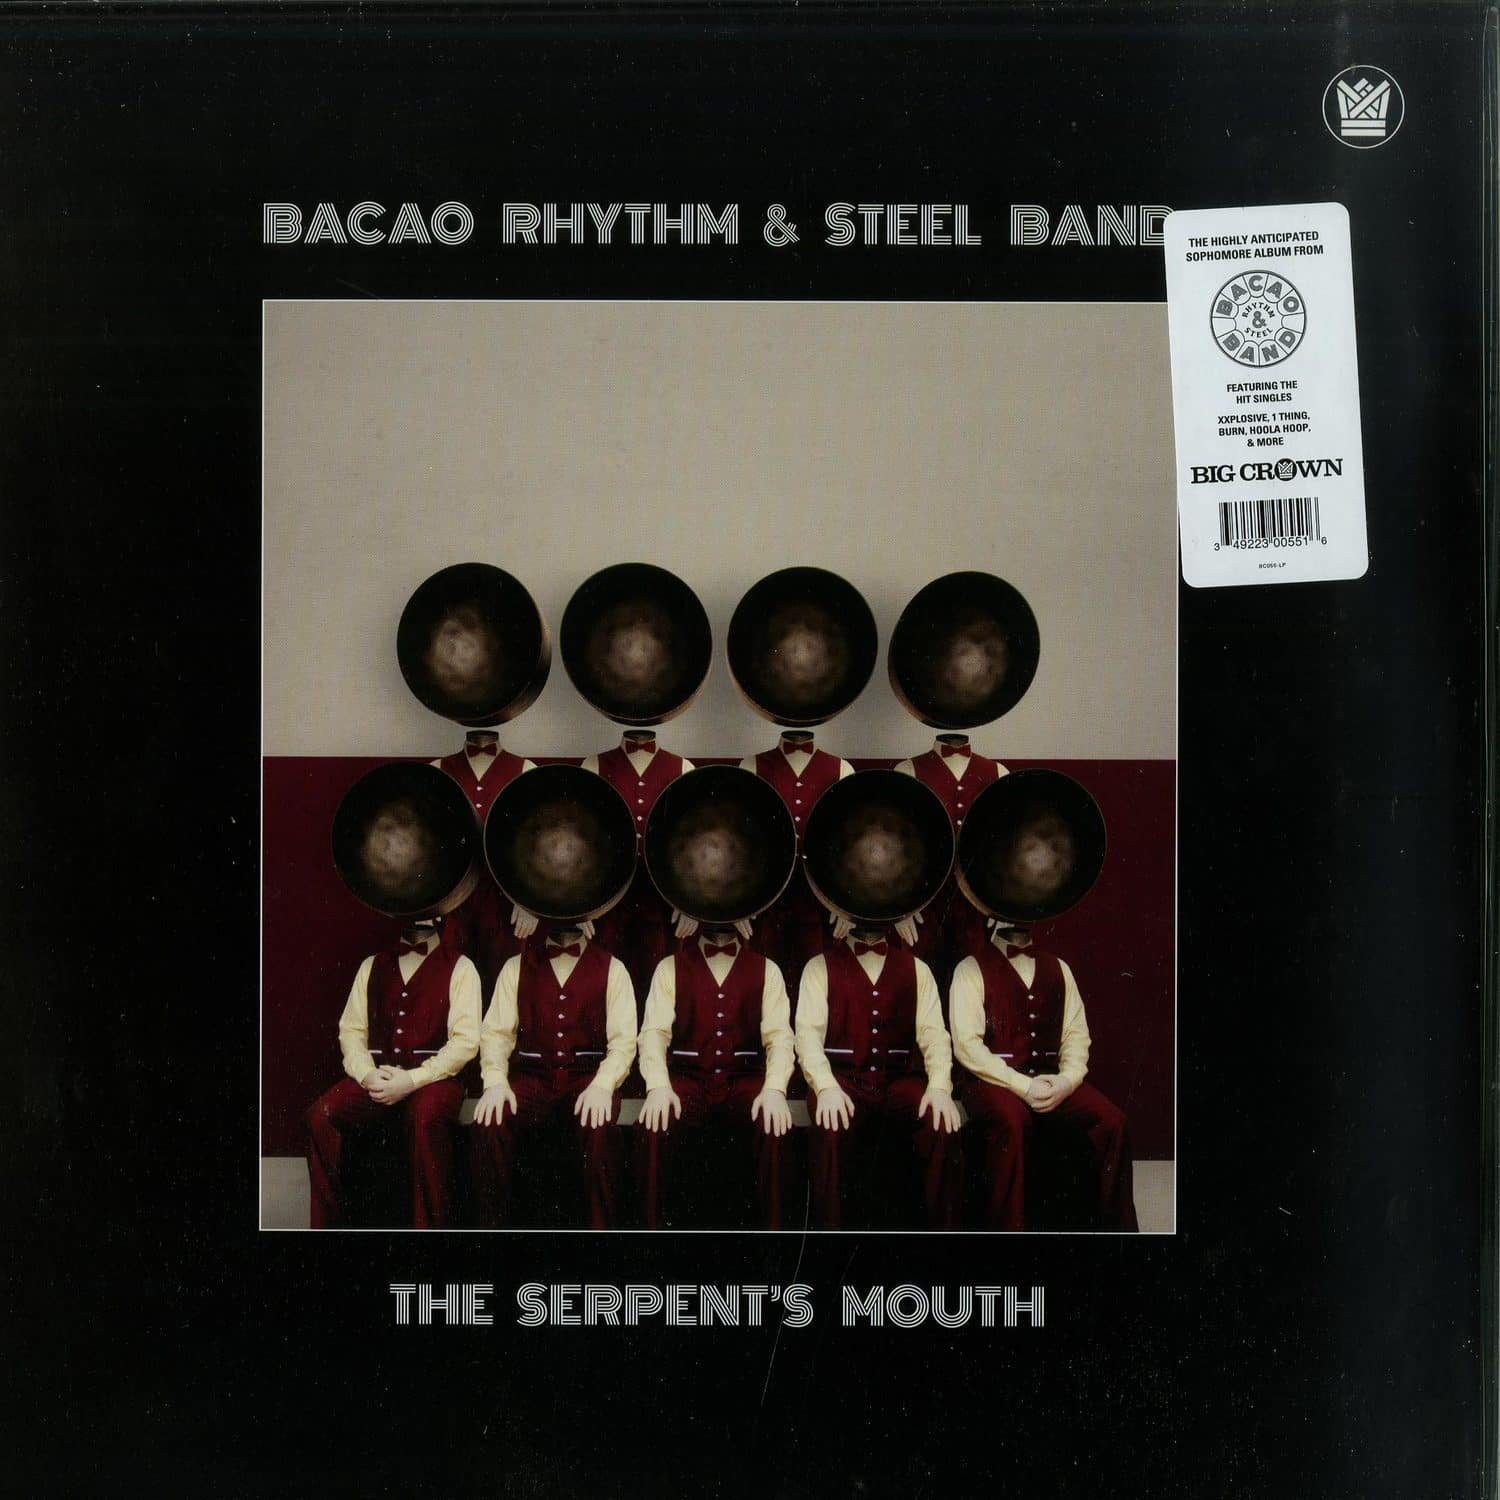 Bacao Rhythm & Steel Band - THE SERPENTS MOUTH 